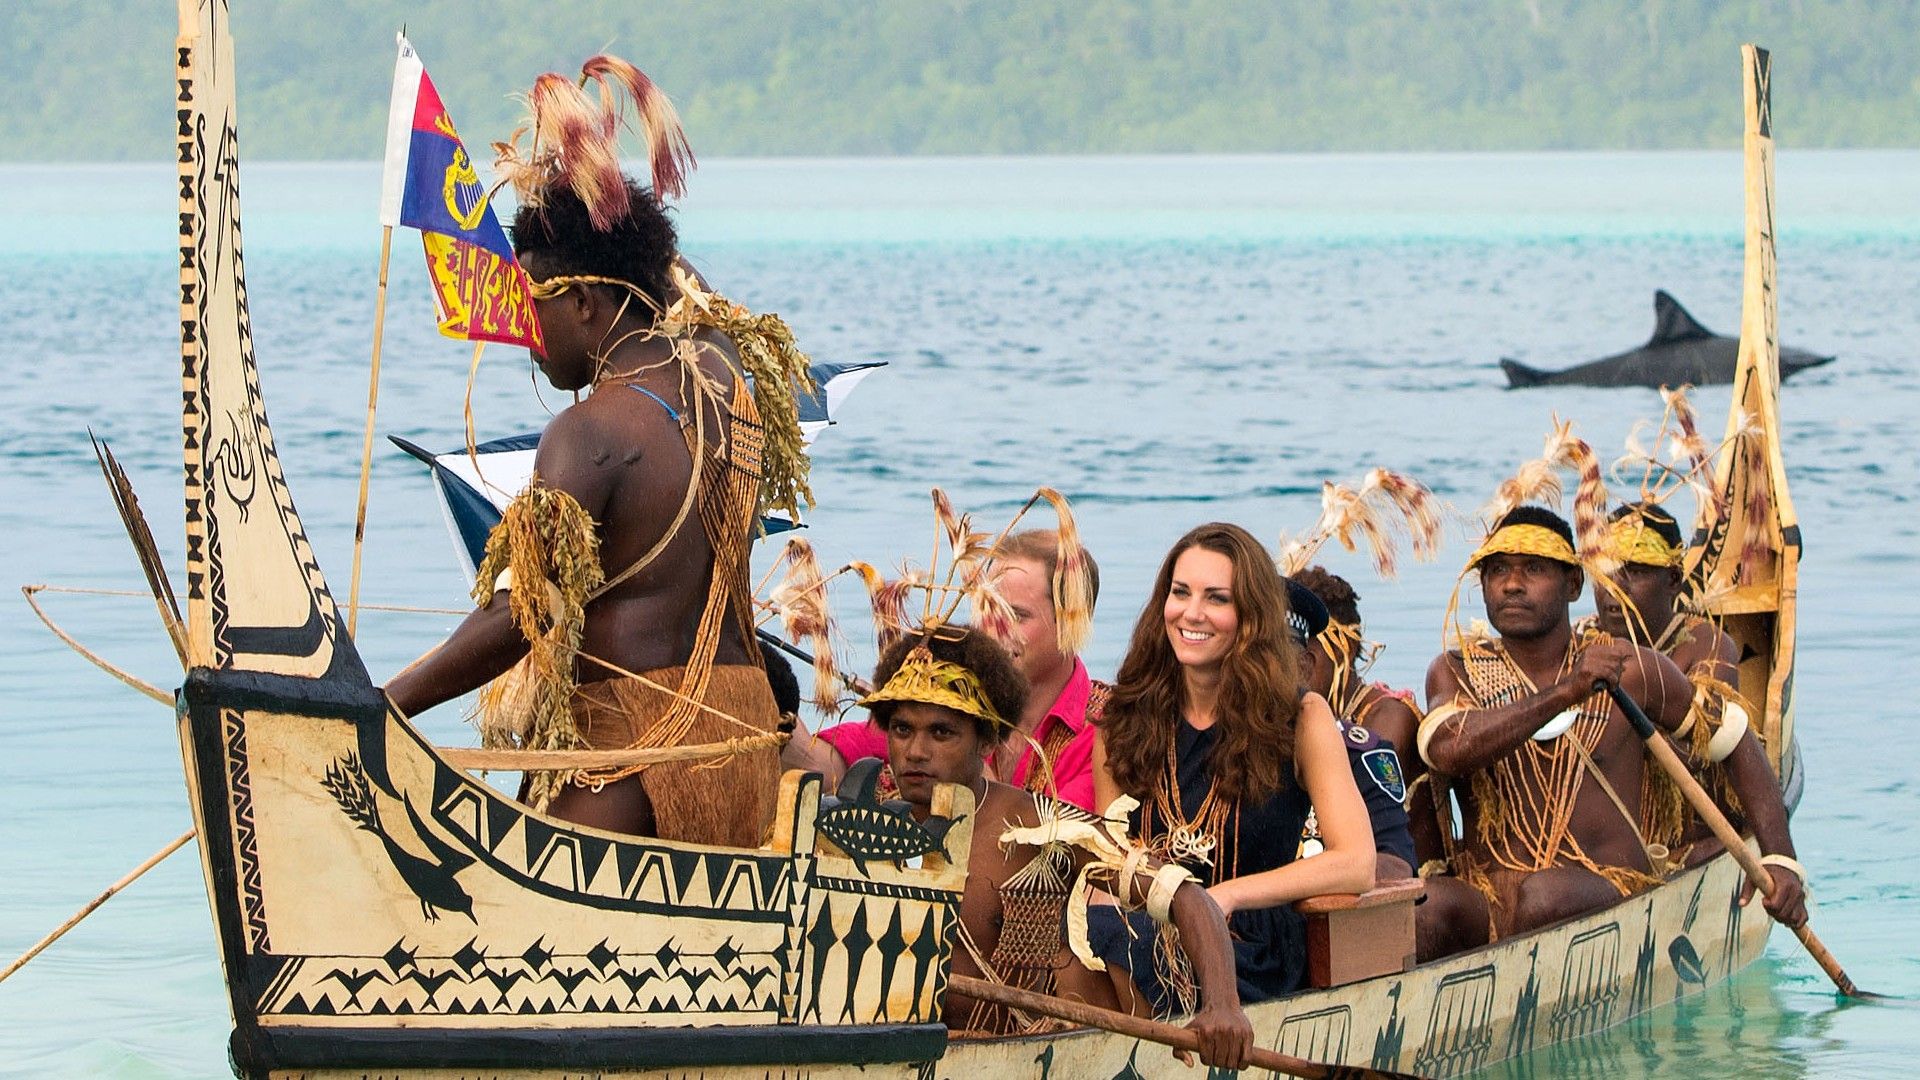 <p>                     During their South East Asia tour, Prince William and Kate Middleton certainly travelled in style - riding in some unique transport they probably wouldn't get out and about in Windsor.                   </p>                                      <p>                     The pair made a spectacular entrance in a beautifully-decorated traditional war canoe.                   </p>                                      <p>                     As well as making for a memorable moment, the trip would have been a special one which could have planted plenty of seeds for the Prince and Princess of Wales of the future, as the area is known for its eco-tourism - a passion for both, with William founding the Earthshot Prize in 2020 to recognise, reward and support those making real environmental change around the world.                   </p>